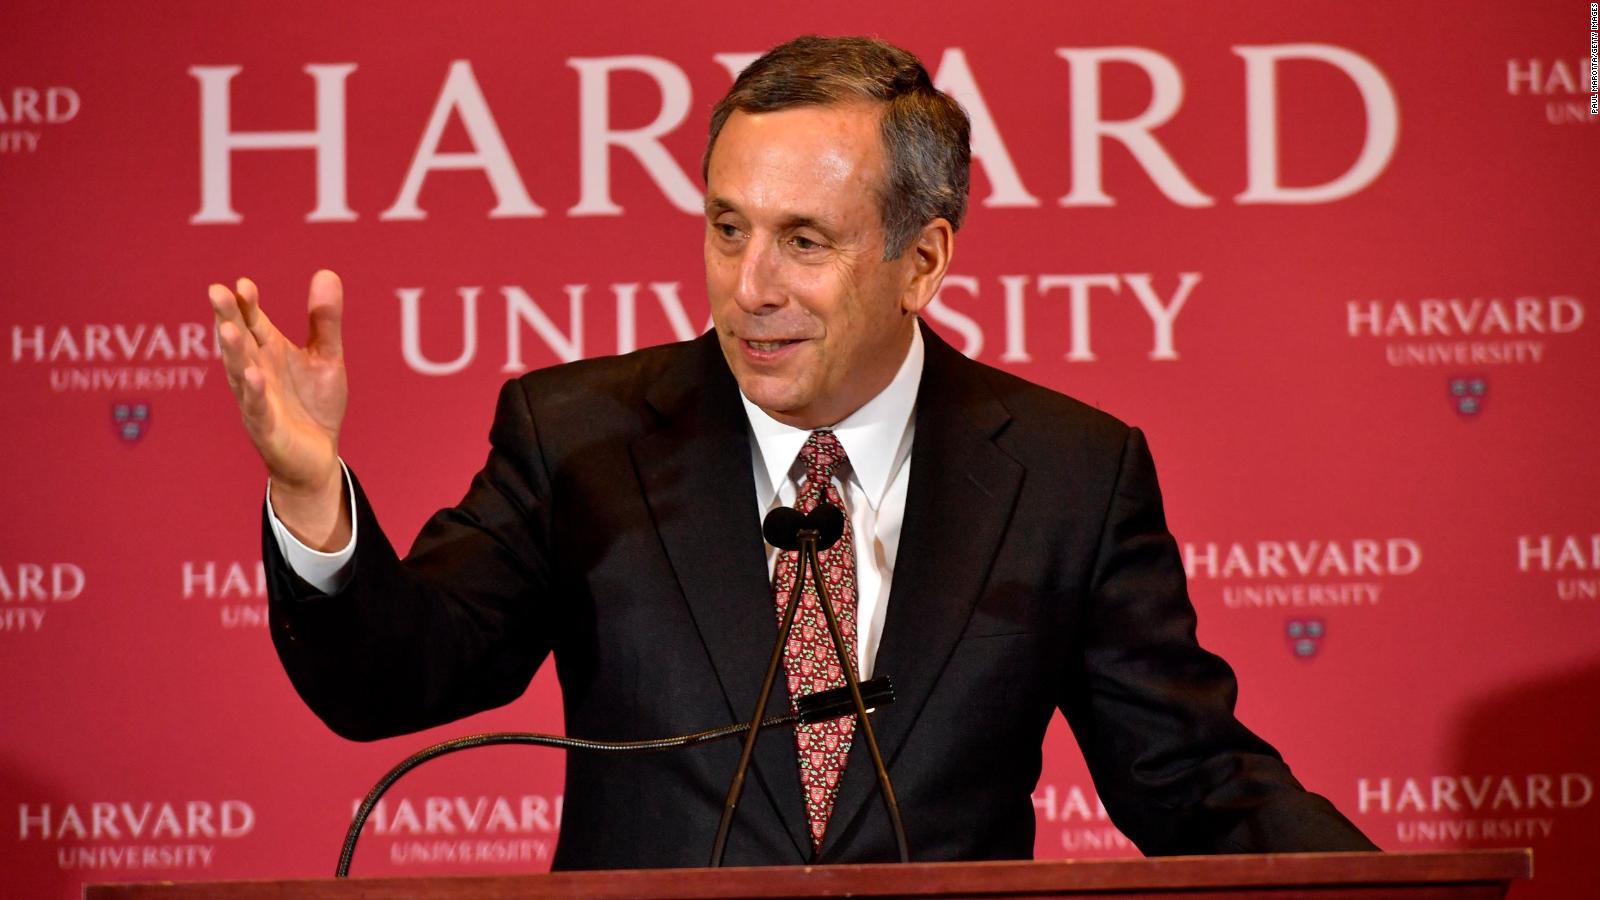 Lawrence Bacow to Harvard's 29th president CNN